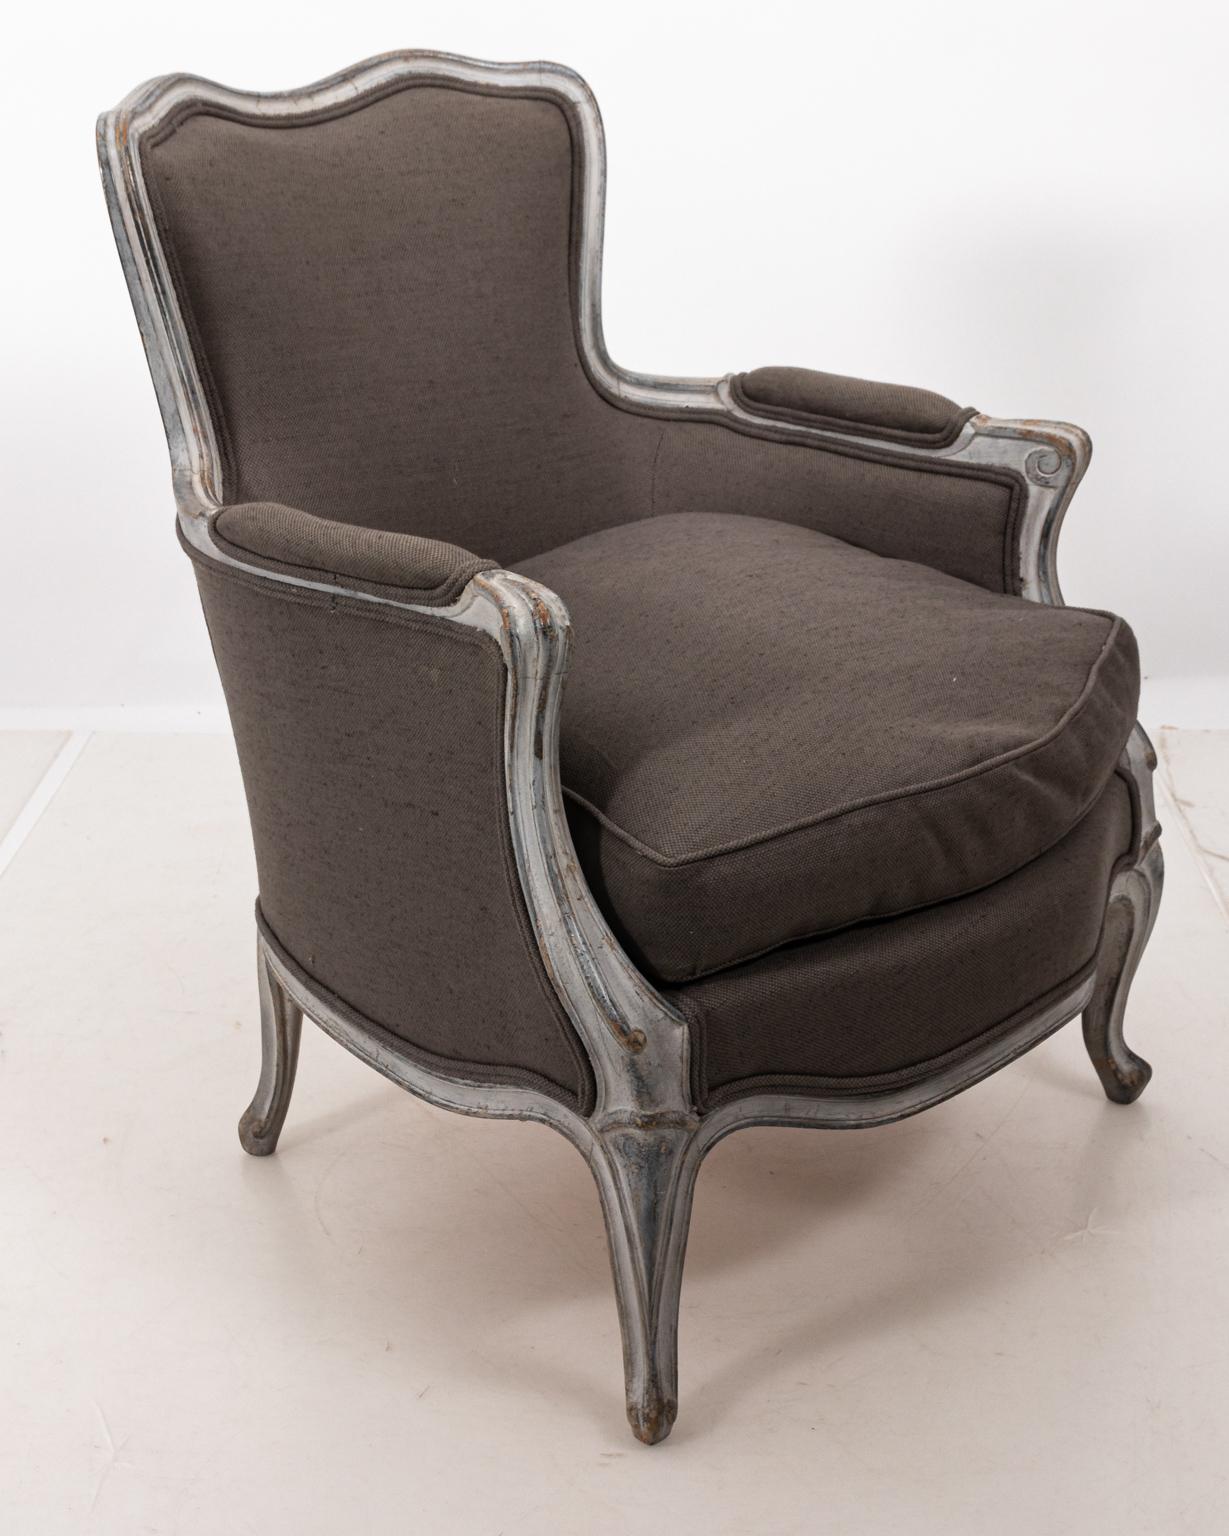 Louis XV style painted Bergère armchair with Rococo details such as cabriole legs. The piece is also upholstered in grey Belgian linen. Please note of wear consistent with age including distressed finish to the wood frame and minor paint loss.